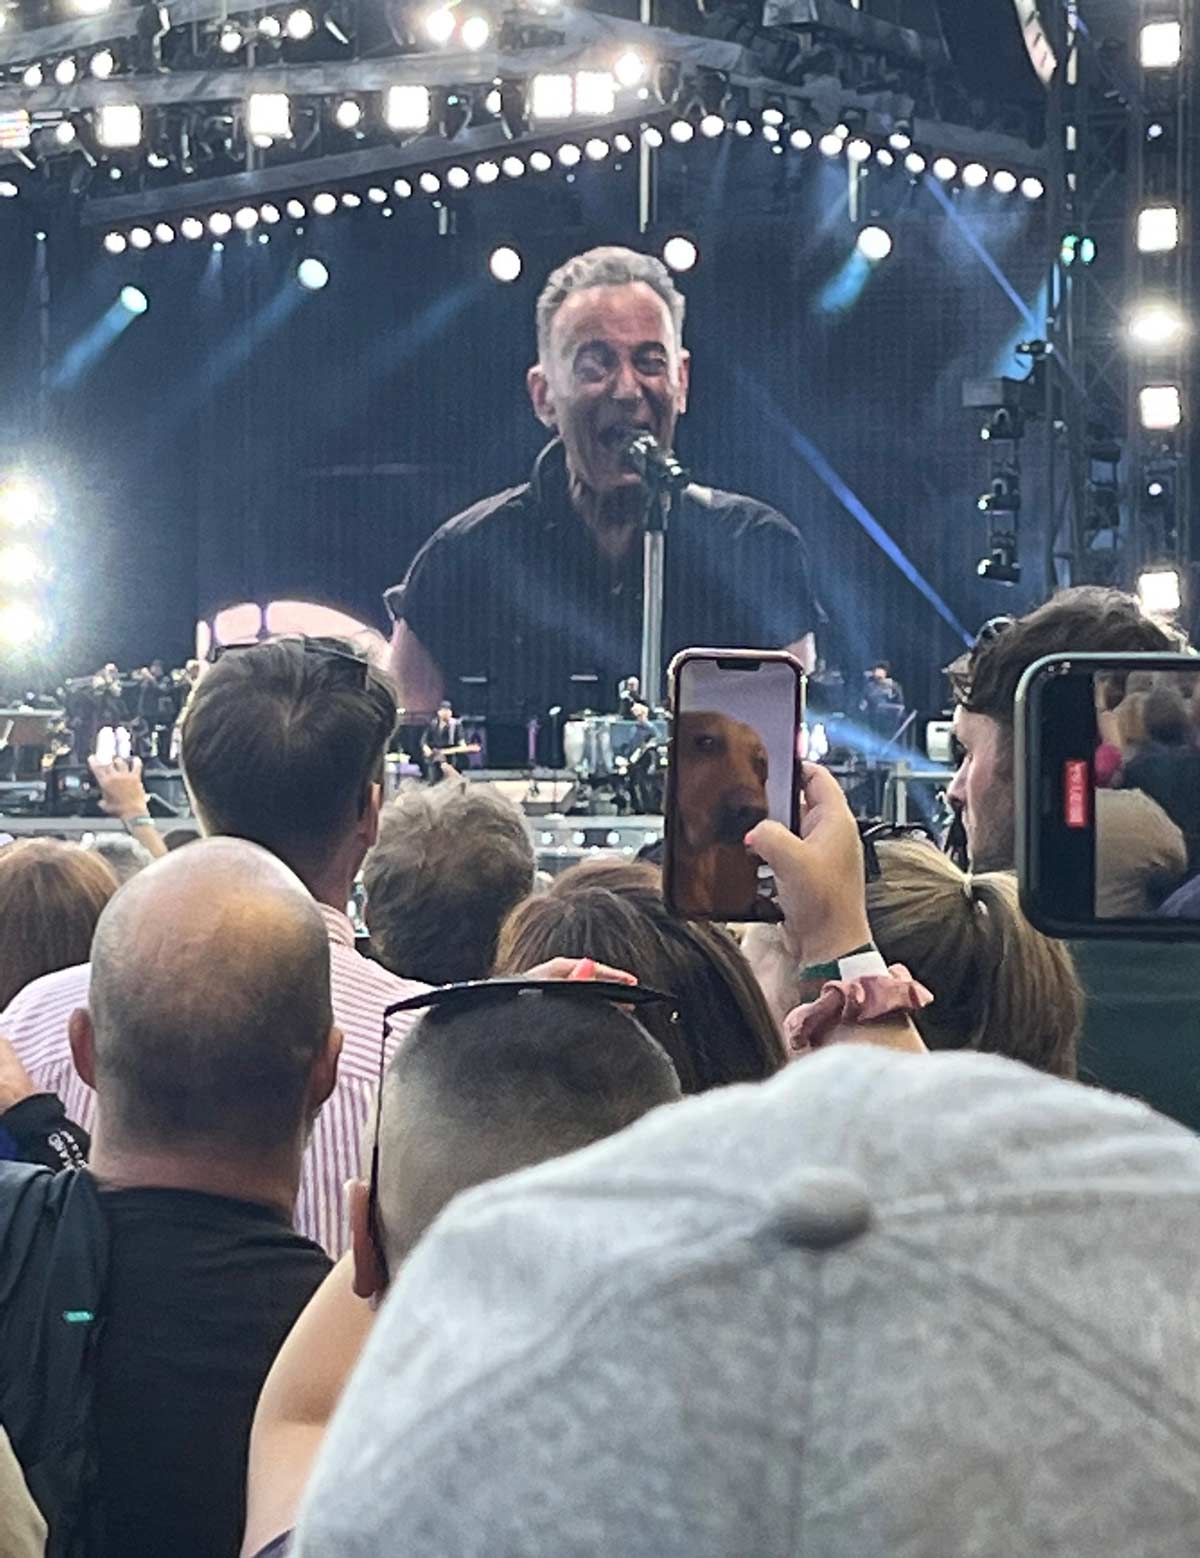 Facetiming at The Bruce Springsteen concert